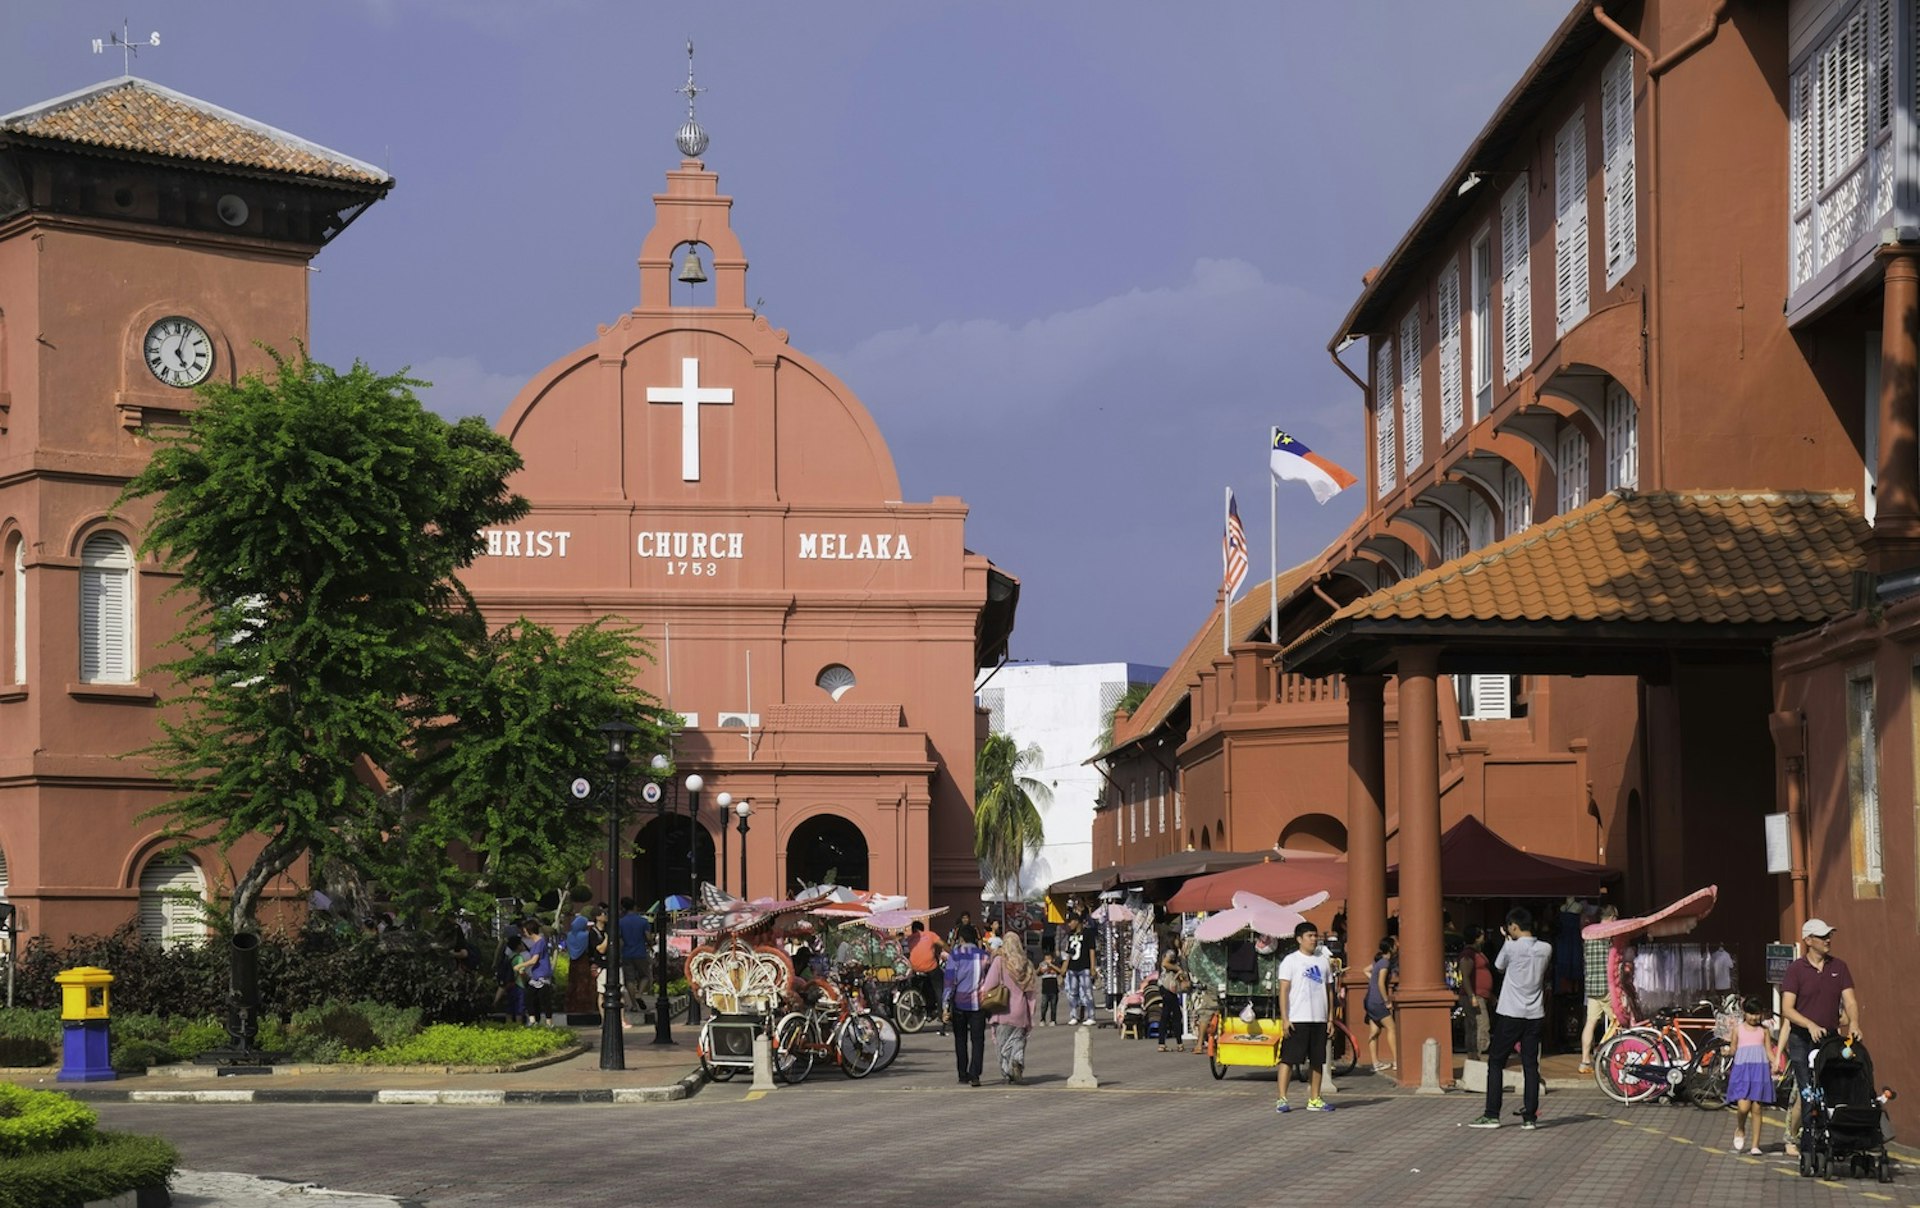 Christ Church in Melaka's town square © John Woodworth / Getty Images